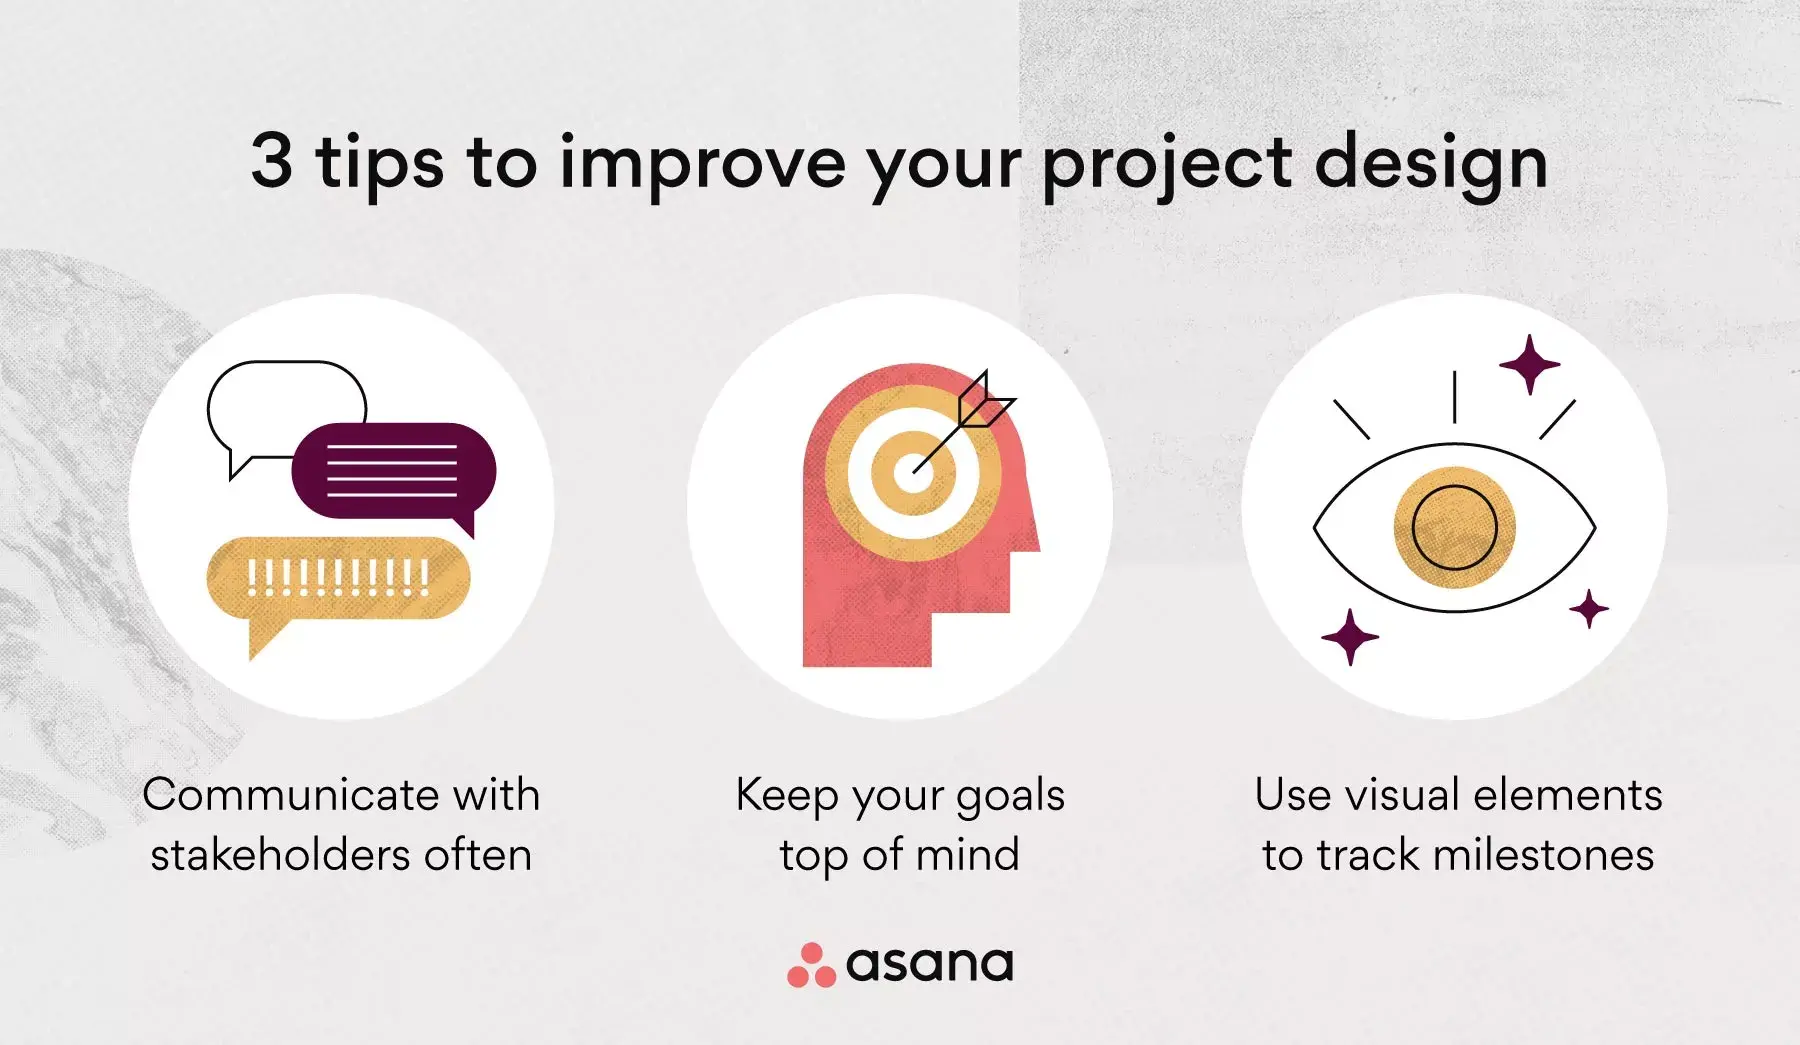 Tips to improve project design